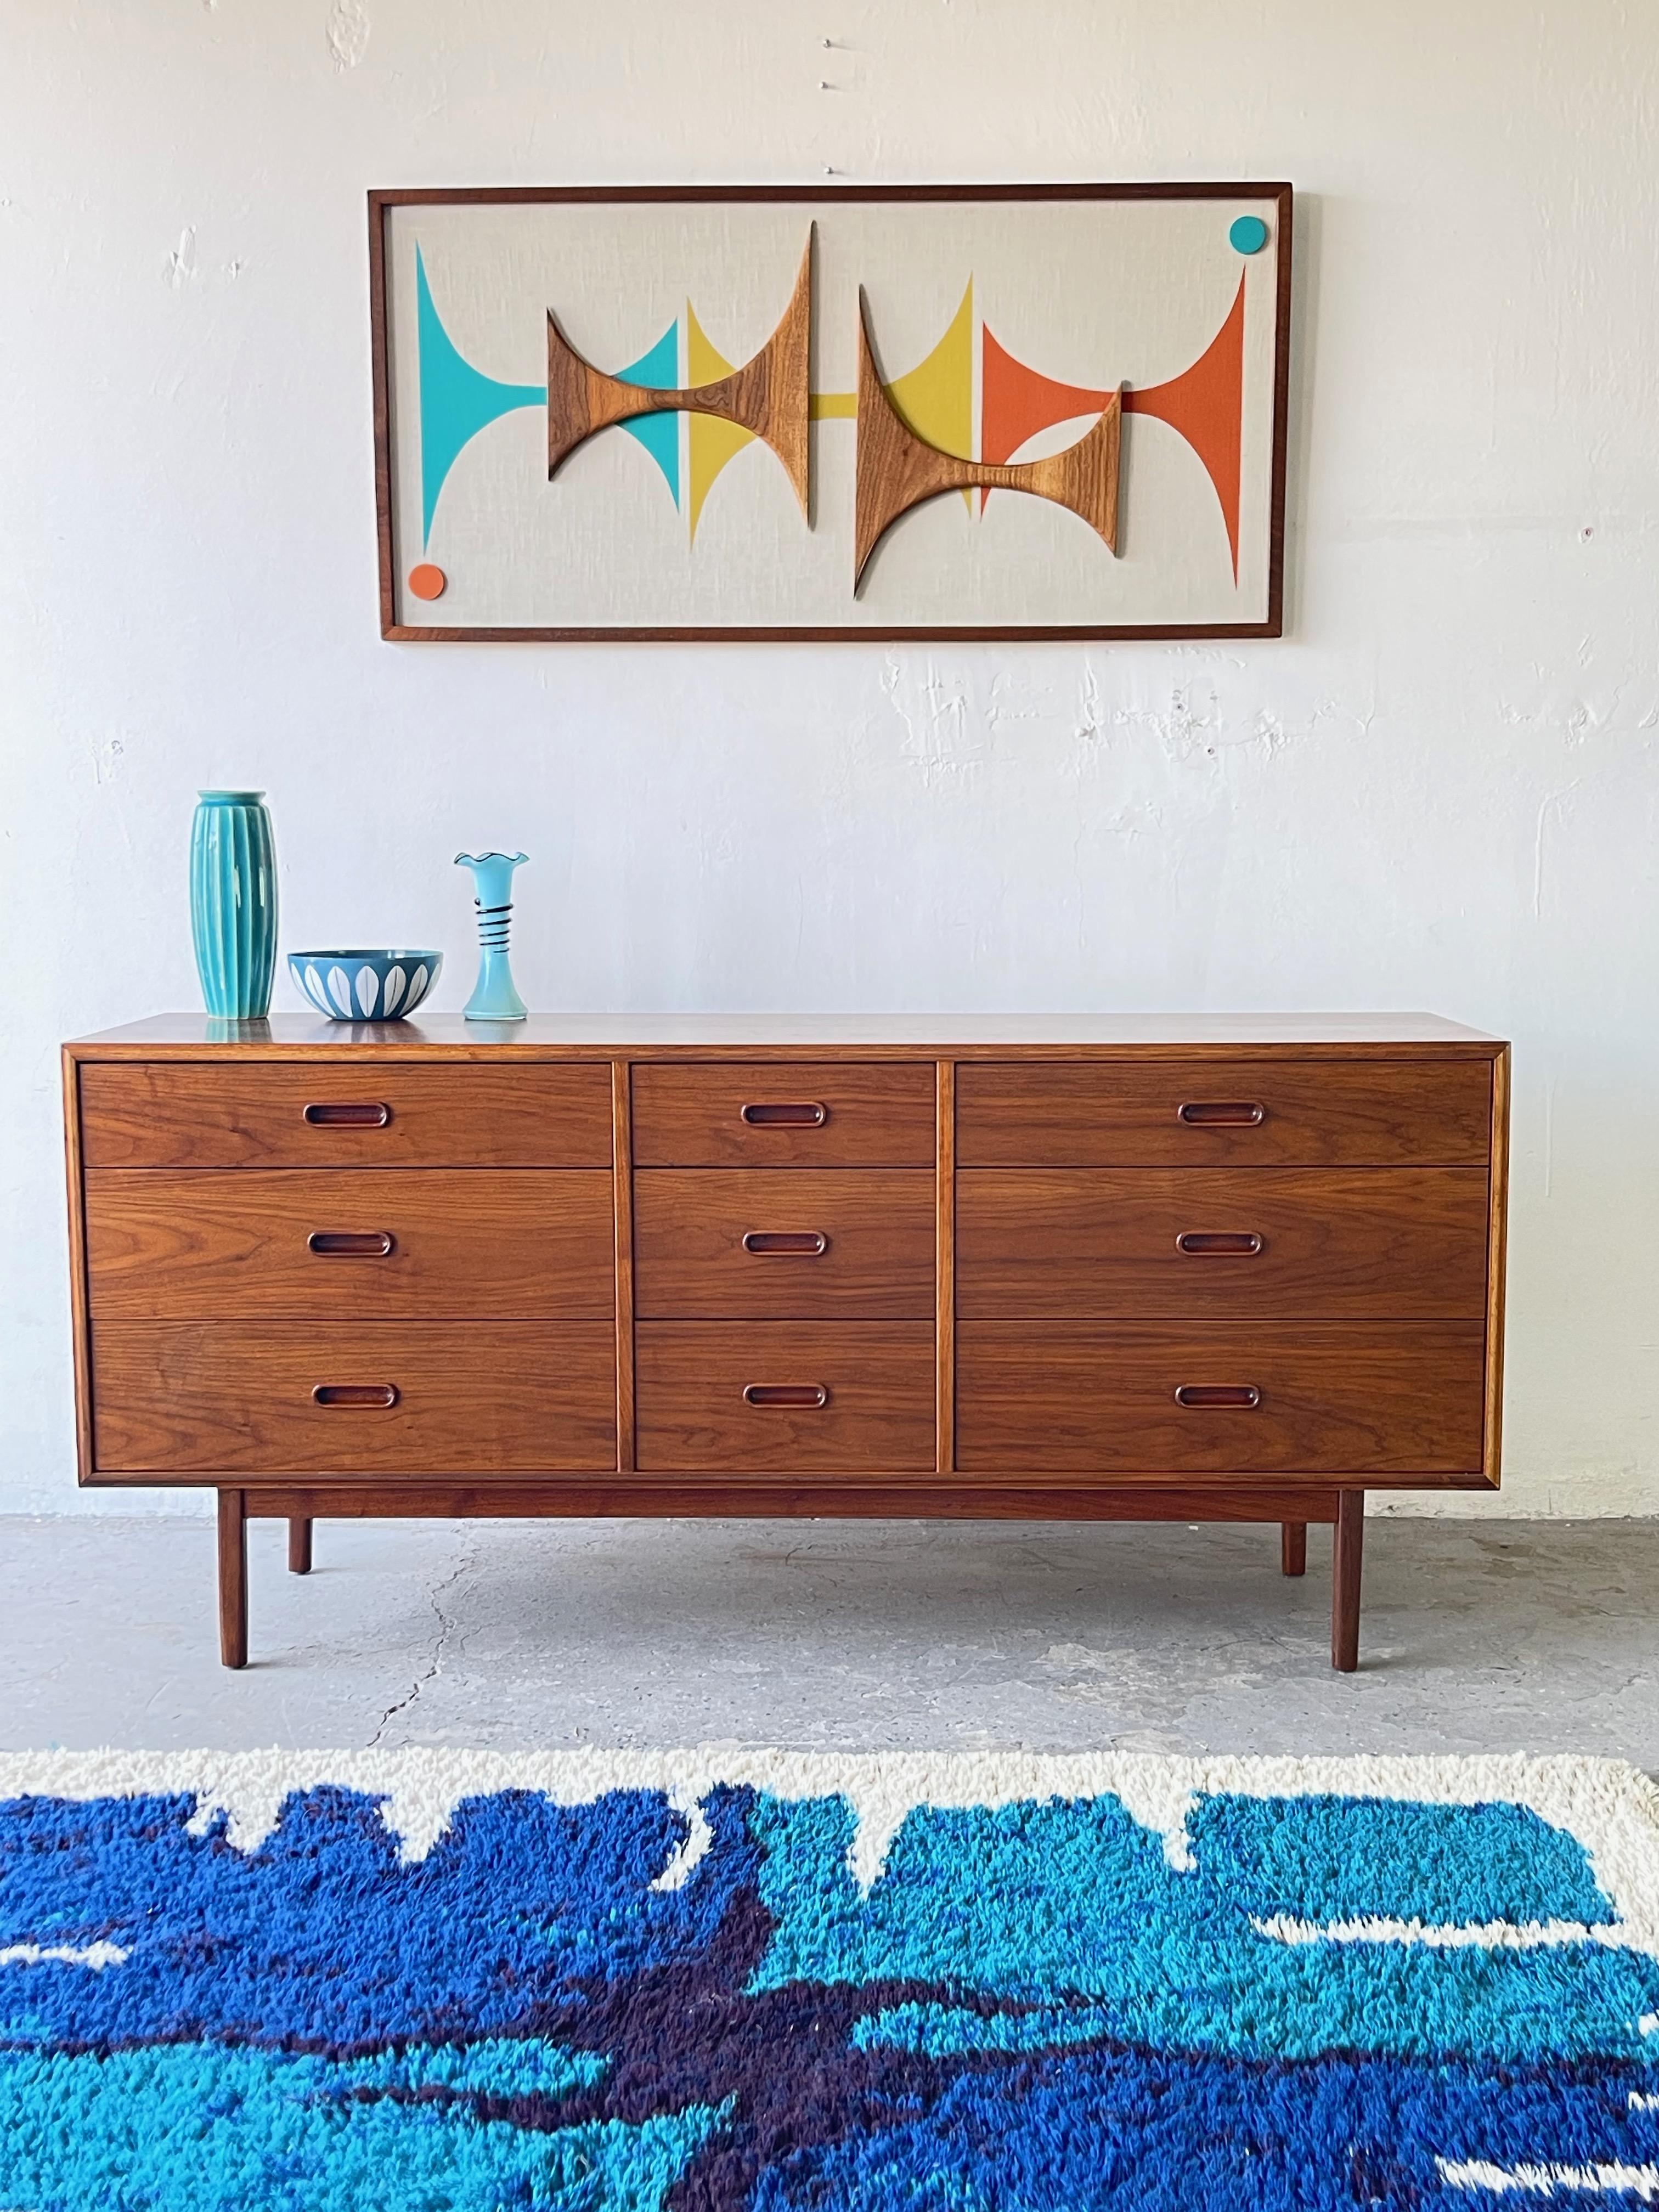 Walnut low boy dresser by Founders. Designed by Jack Cartwright, this fantastic walnut dresser, has nine drawers and a beautiful walnut finish. Use in front hall as a landing strip for your keys, mail, etc. or in the bedroom as a dresser or as a